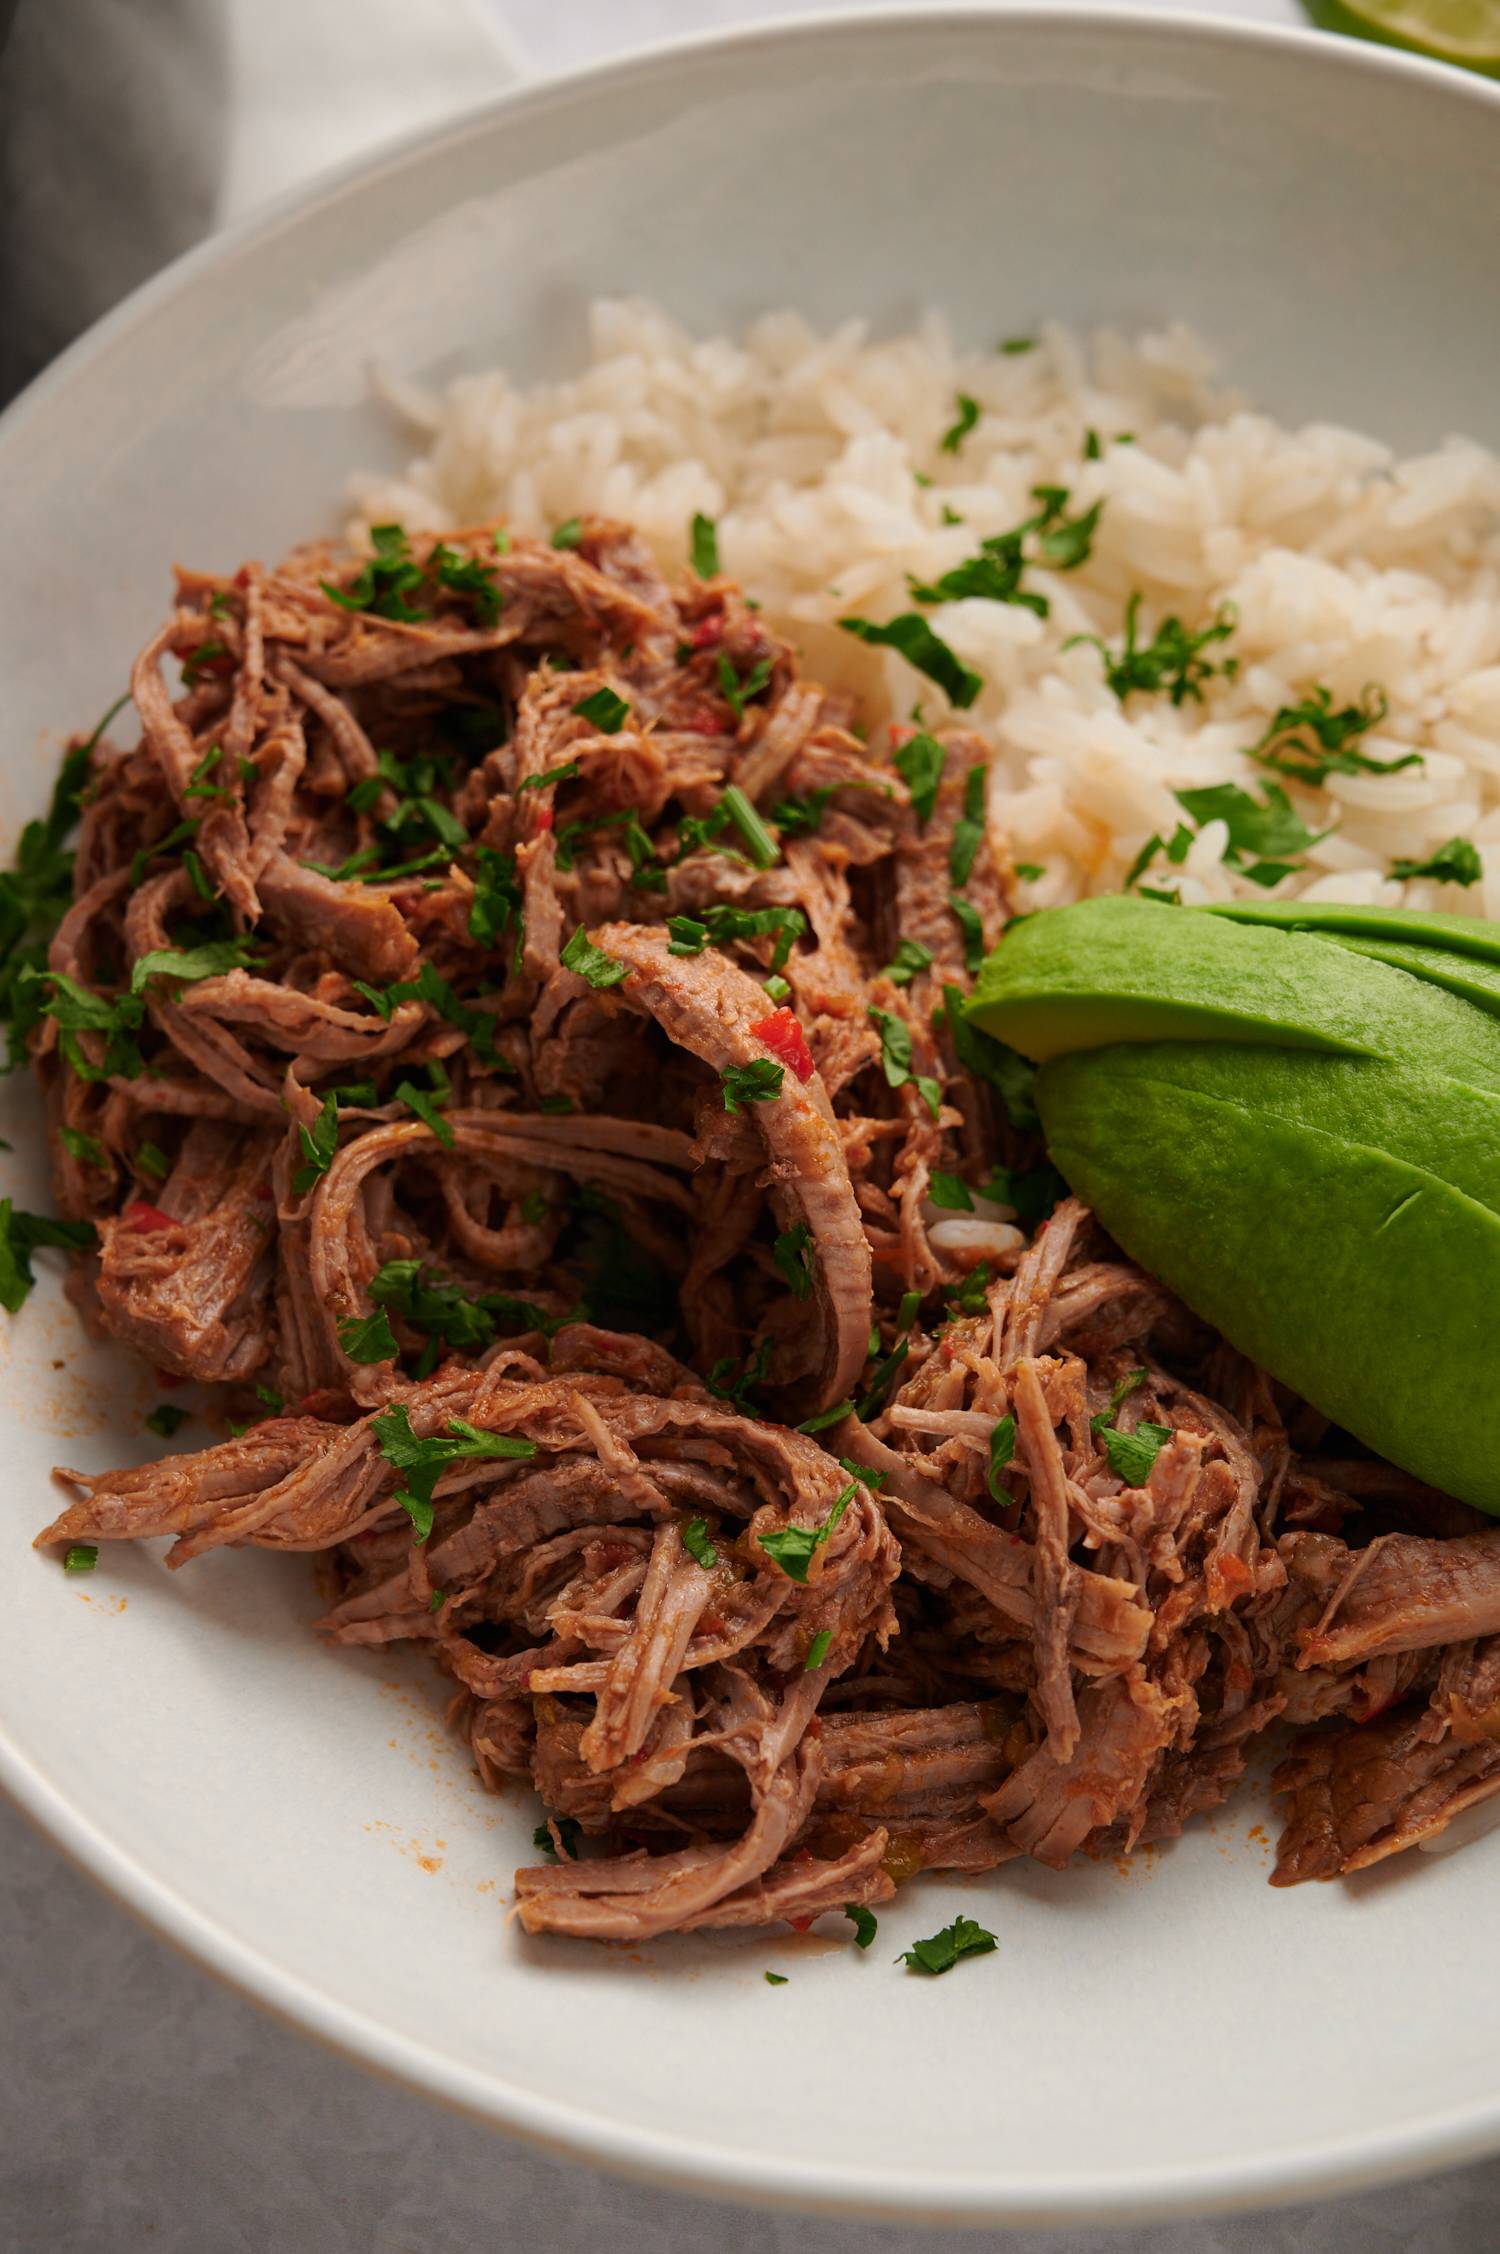 Shredded beef machaca served in a bowl with white rice, avocado, lime, and cilantro.